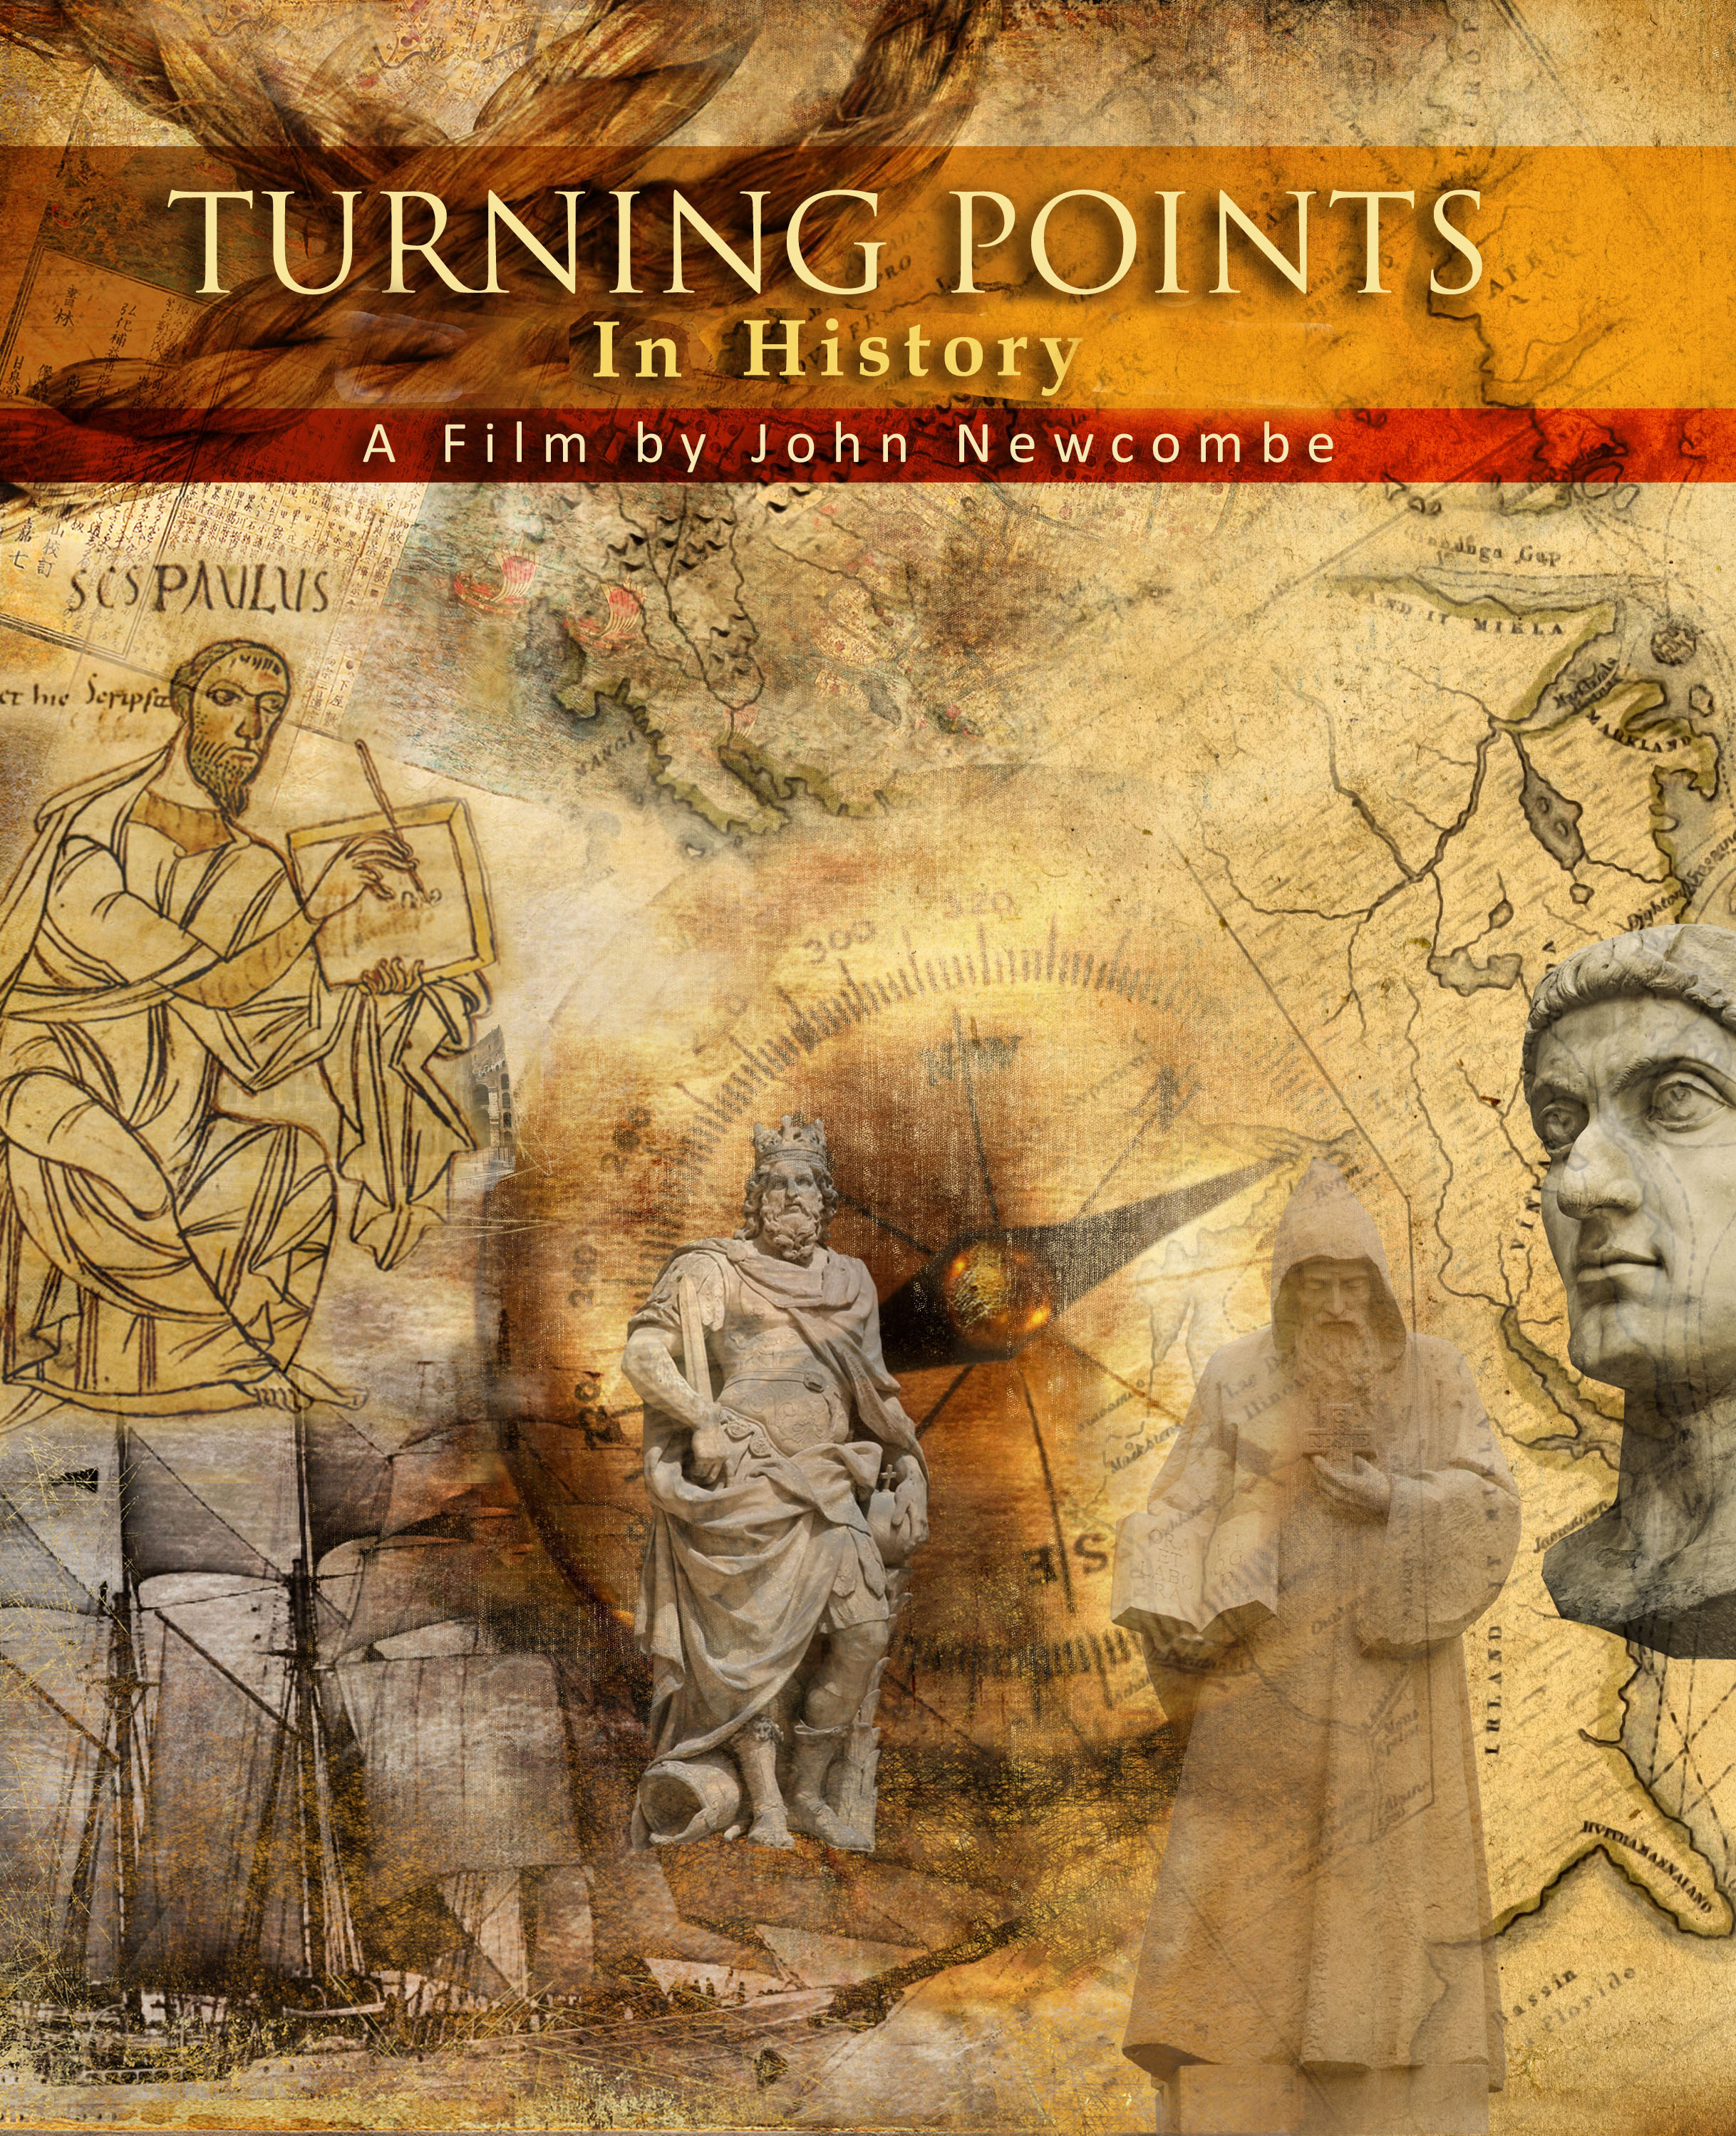 TURNING POINTS IN HISTORY